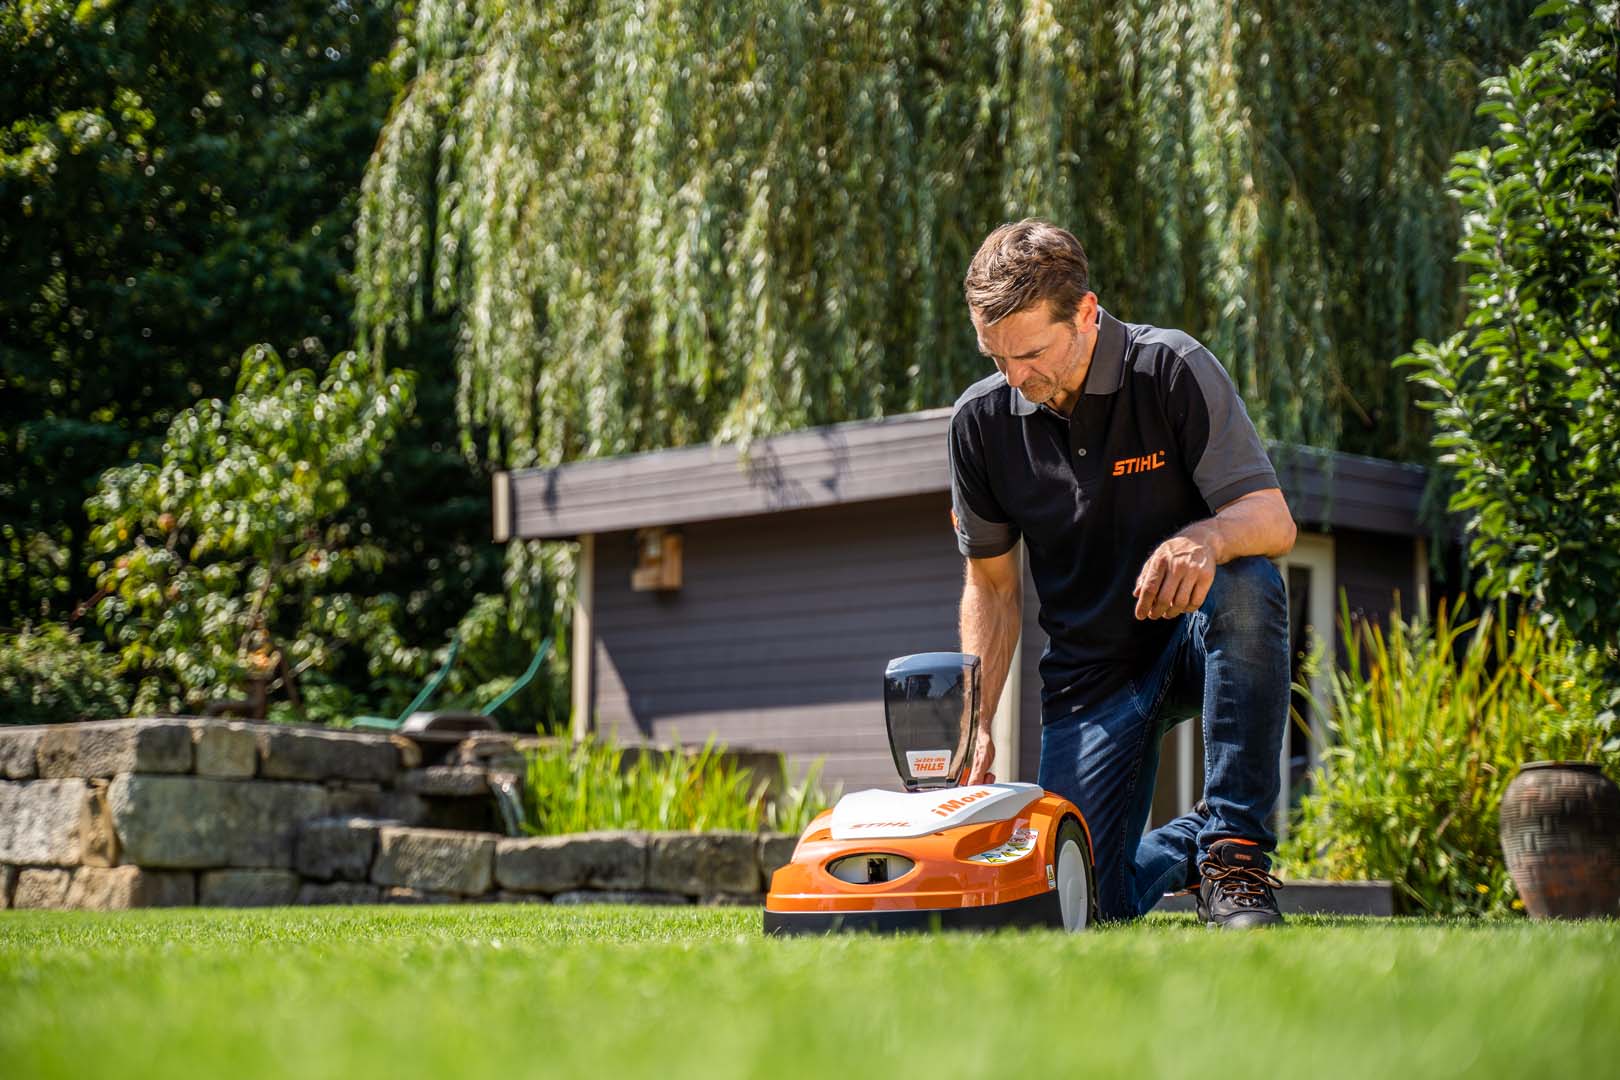 A STIHL dealer kneeling to adjust settings on a STIHL RMI 422 iMOW® robot mower in a garden